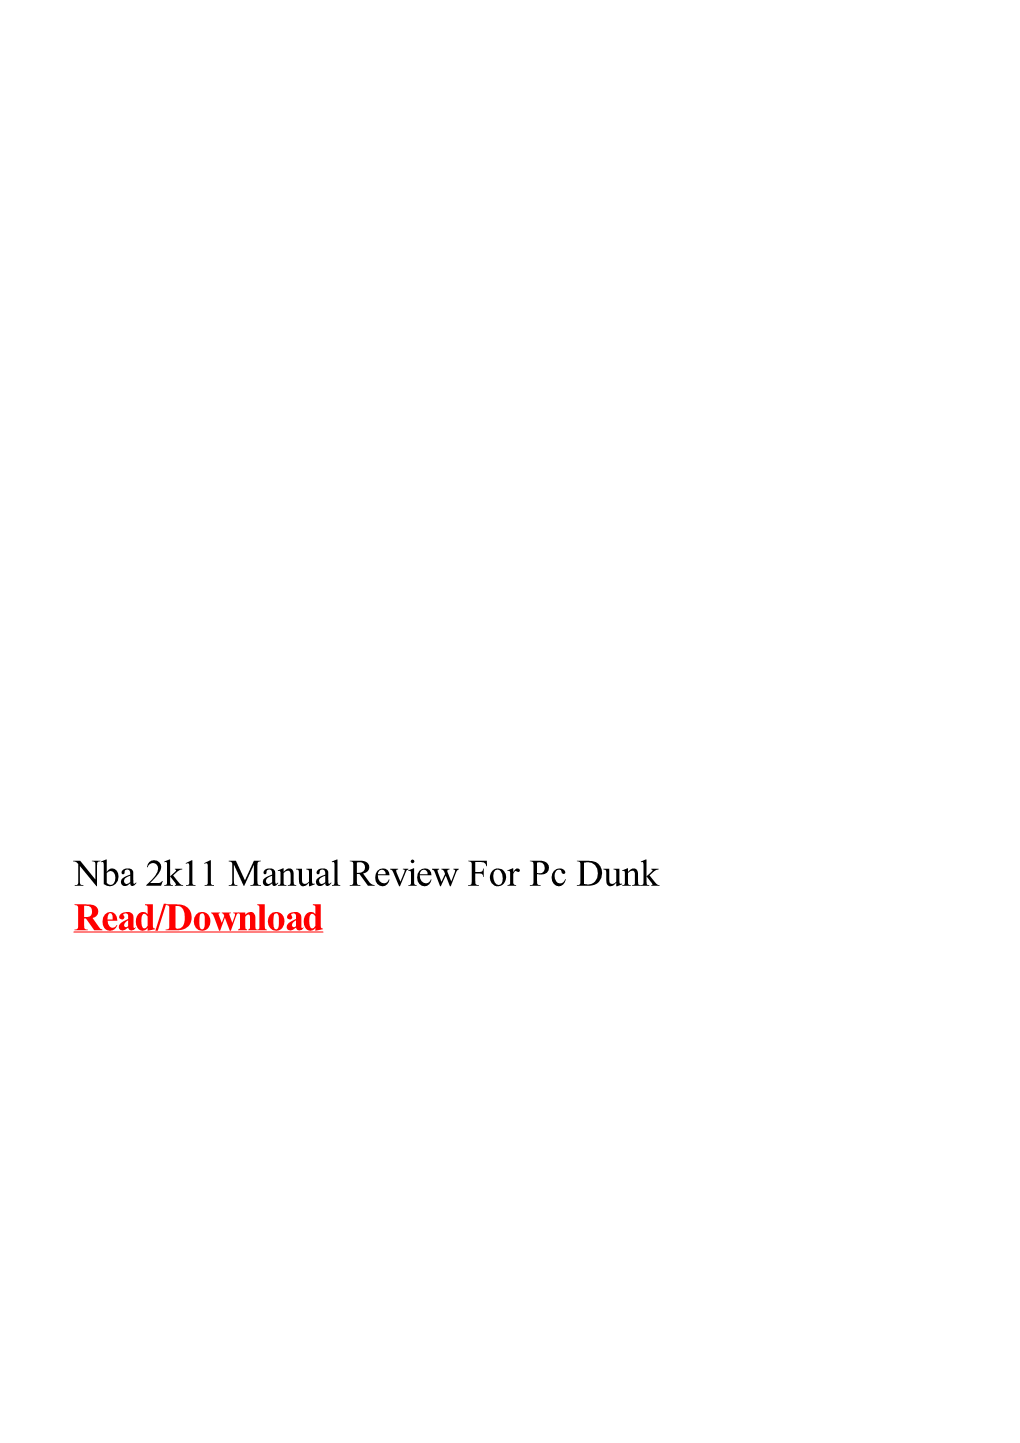 Nba 2K11 Manual Review for Pc Dunk